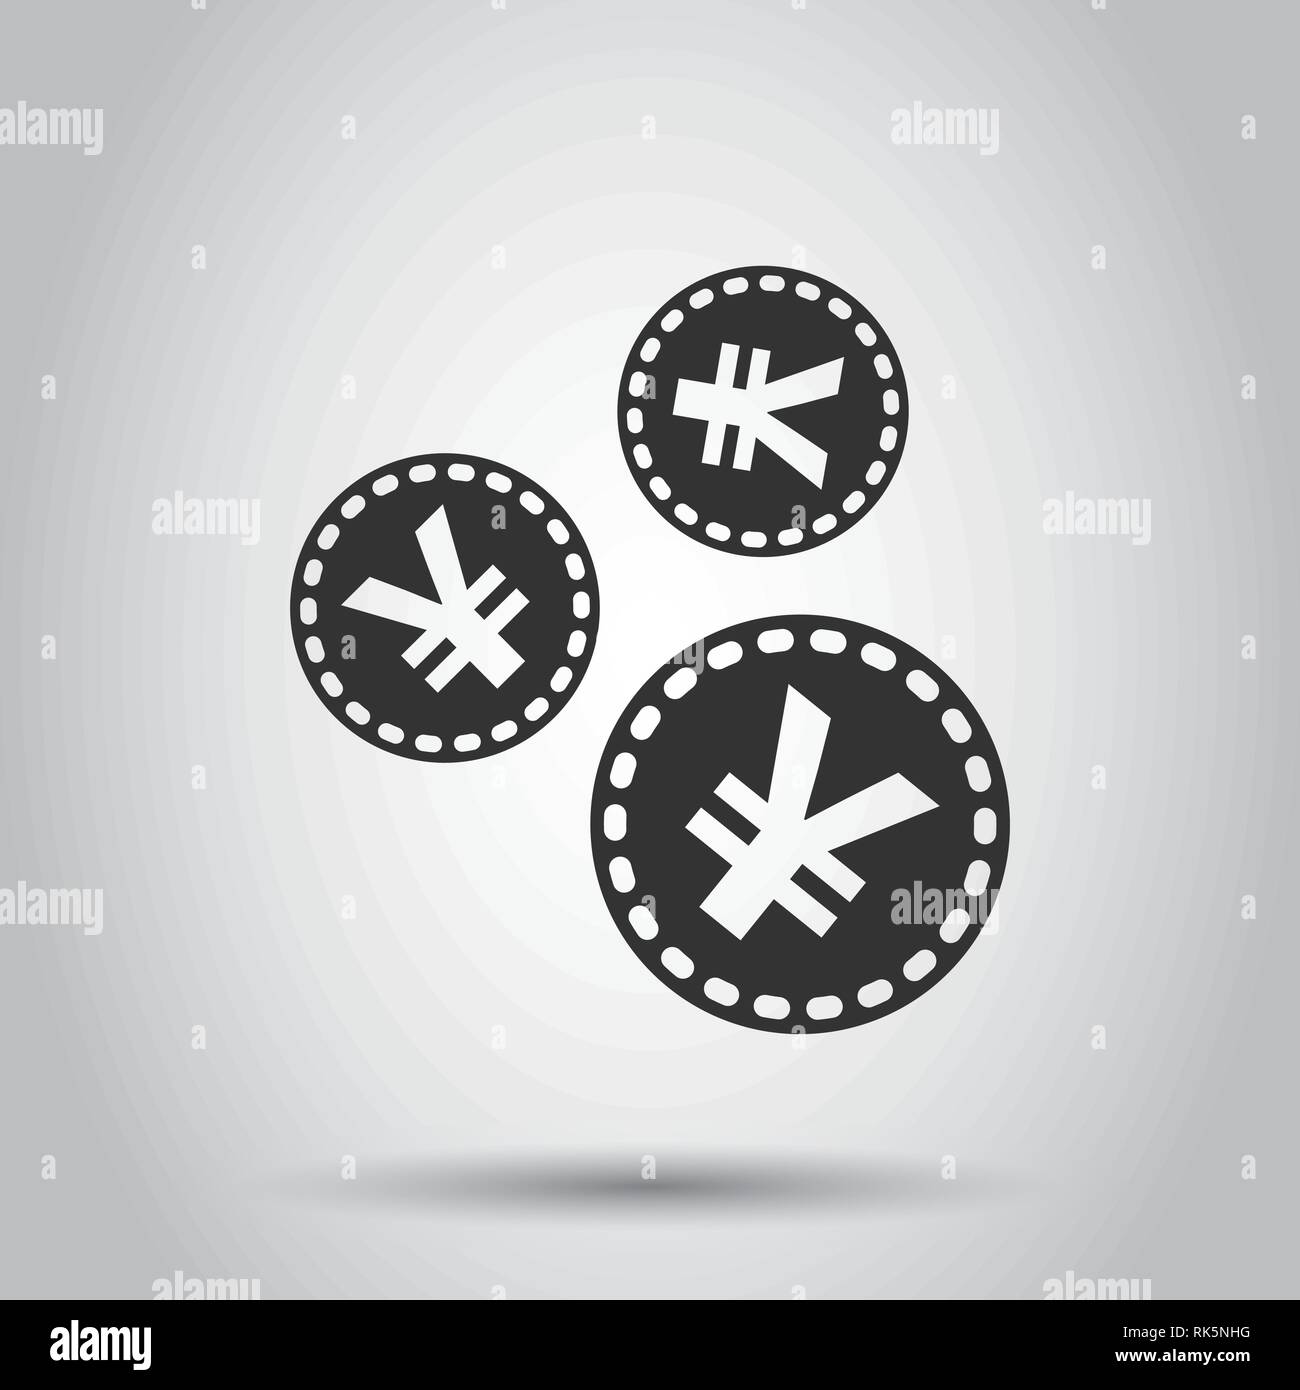 Yen, yuan money currency vector icon in flat style. Yen coin symbol illustration on white background. Asia money business concept. Stock Vector